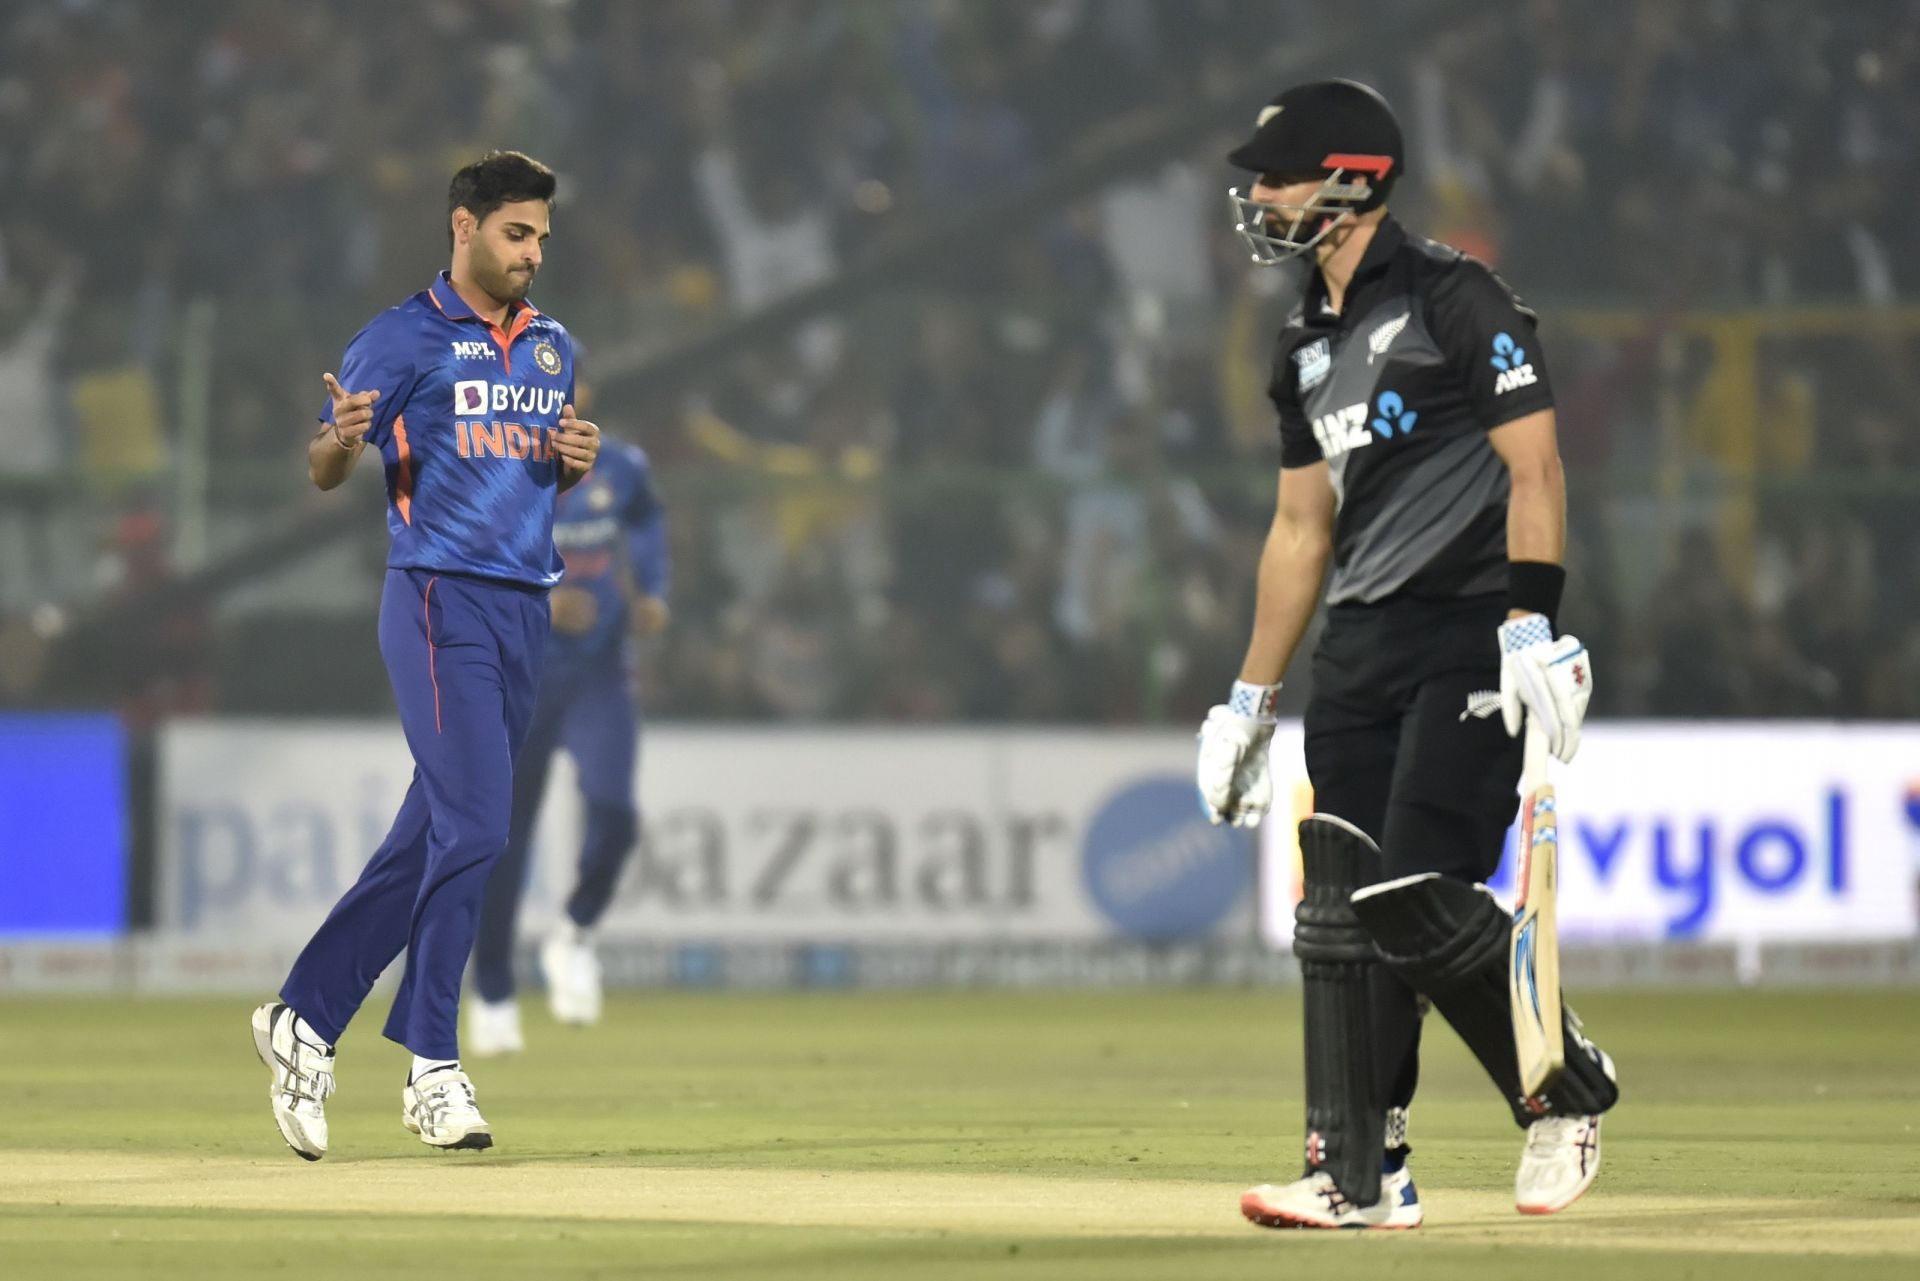 Aakash Chopra highlighted that Bhuvneshwar Kumar bowled well both in the Powerplay and at the death